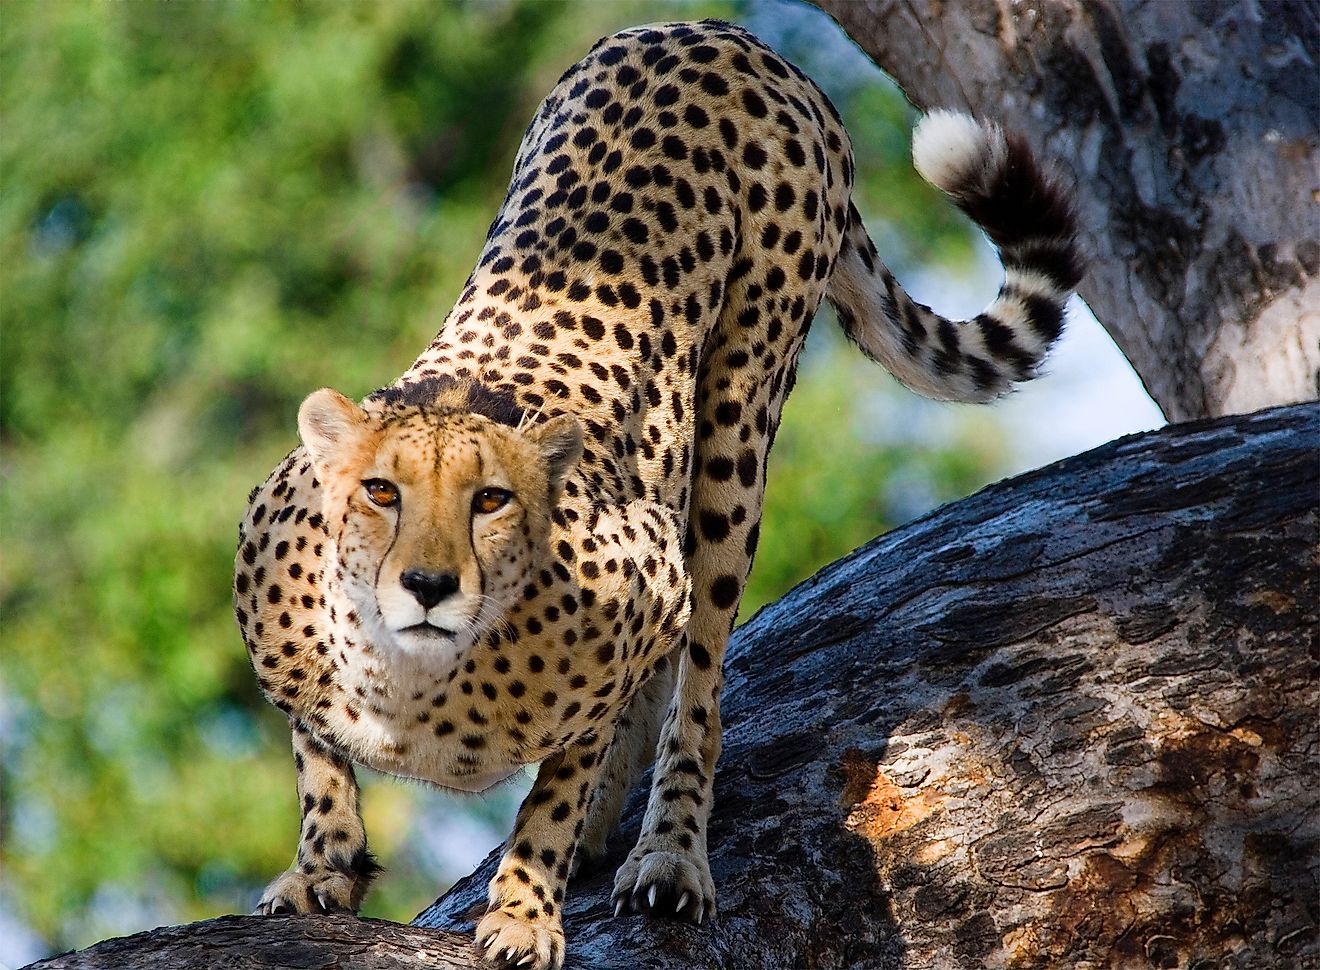 What Are The Differences Between Asiatic Cheetahs And African Cheetahs